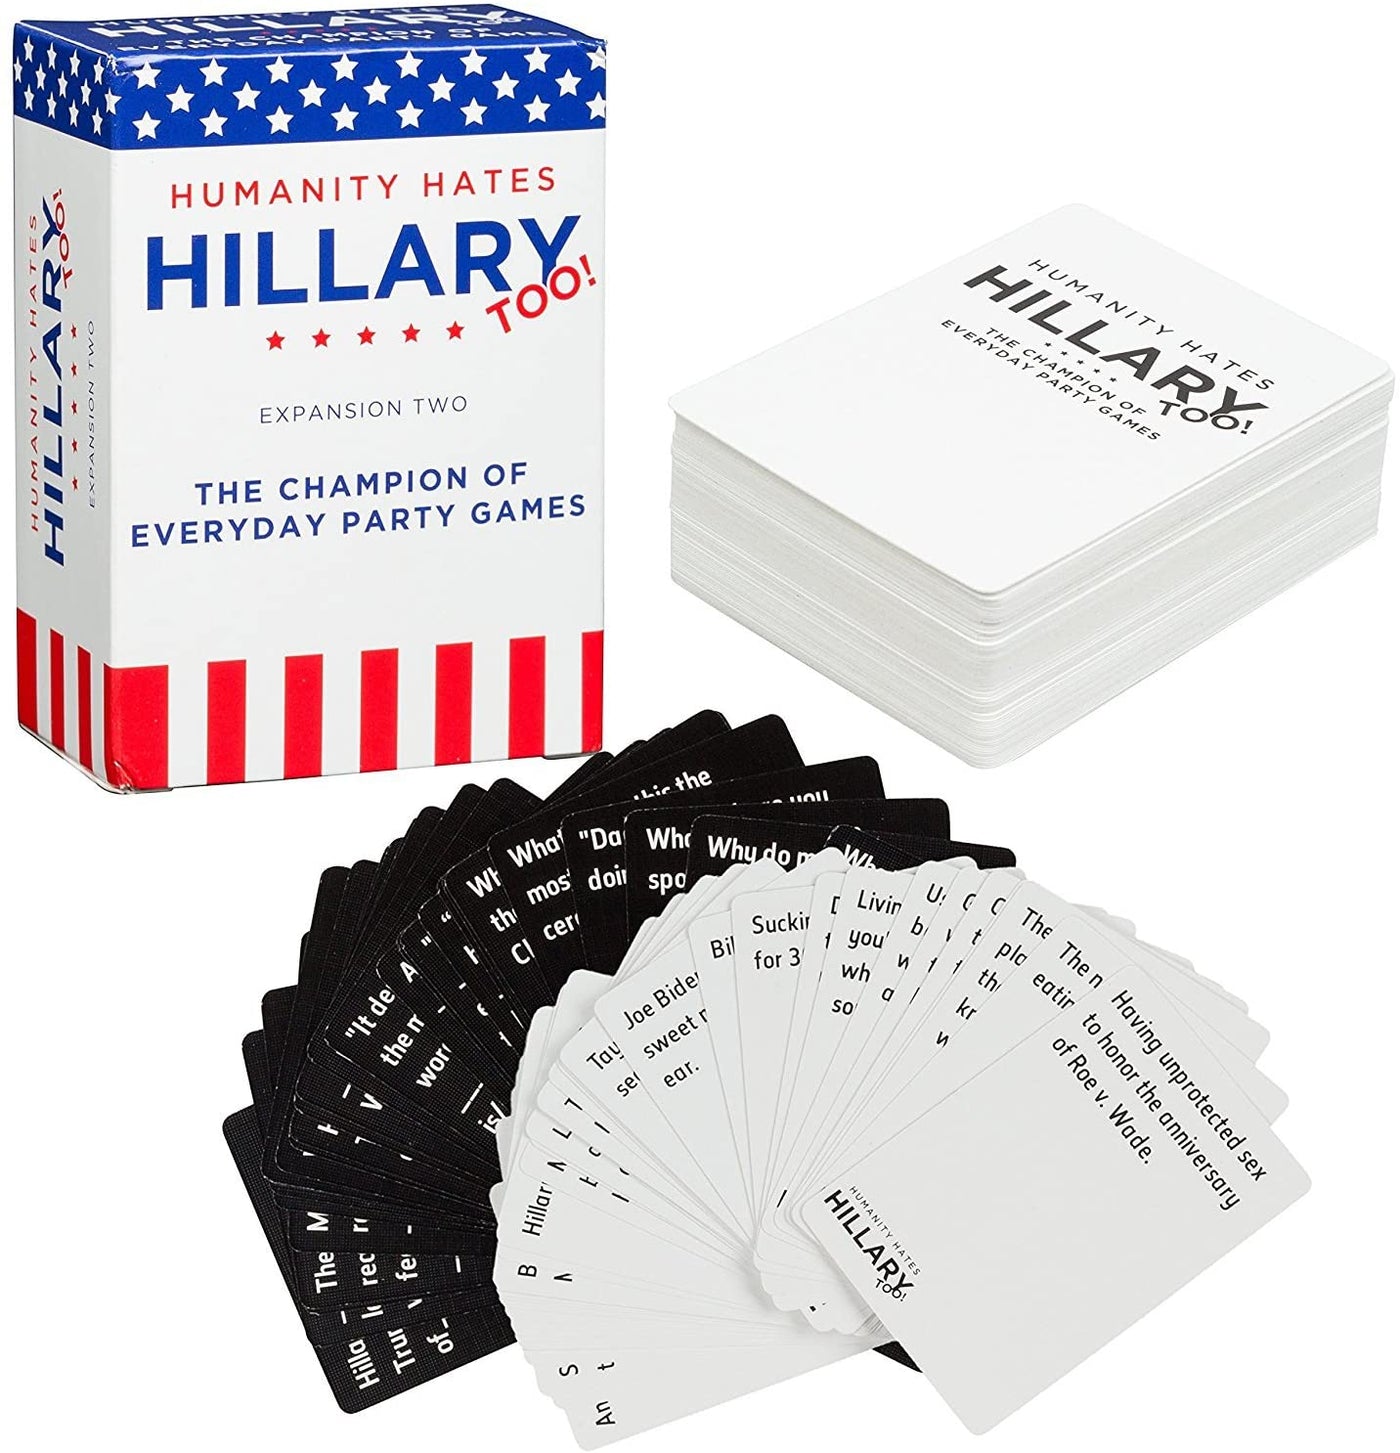 Humanity Hates Hillary Too: Expansion 2